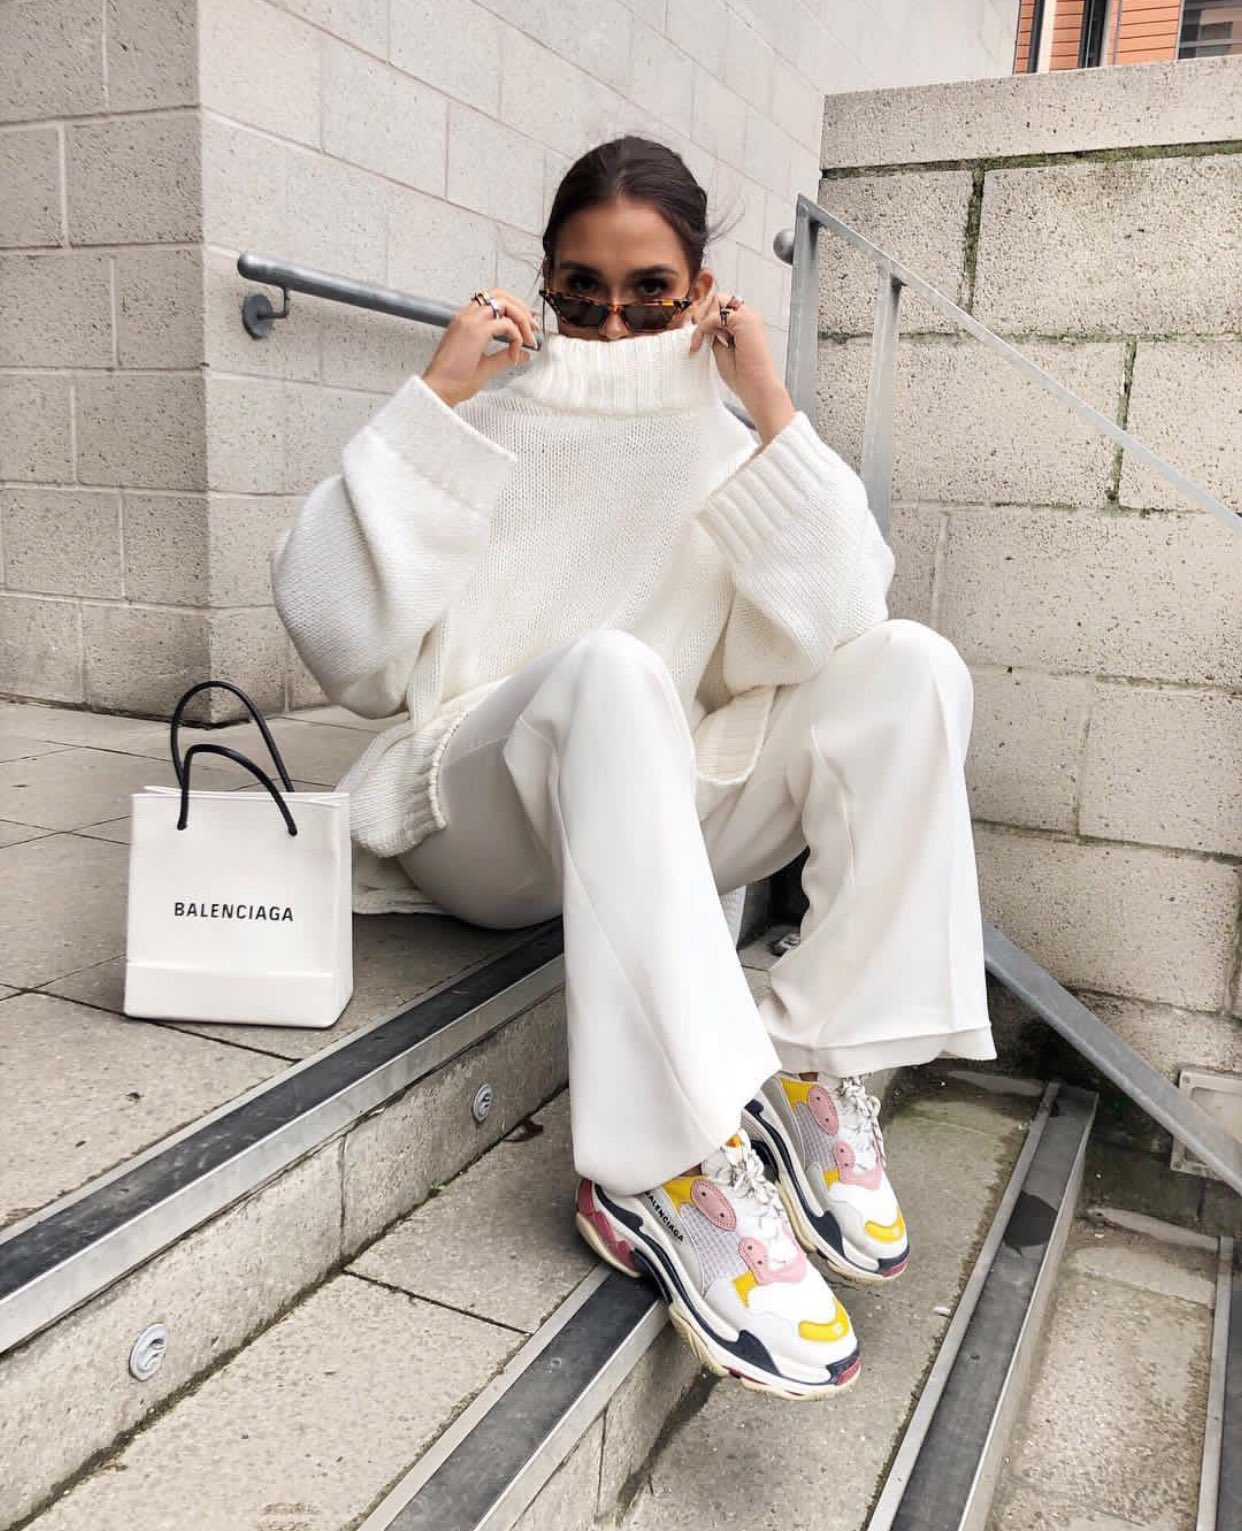 slack oxiderer Menagerry femininitē on Twitter: "Alicia Roddy wearing Balenciaga shoes and bag,  Topshop pants and H&amp;M sweater. https://t.co/Ljf6iFqG5n" / Twitter